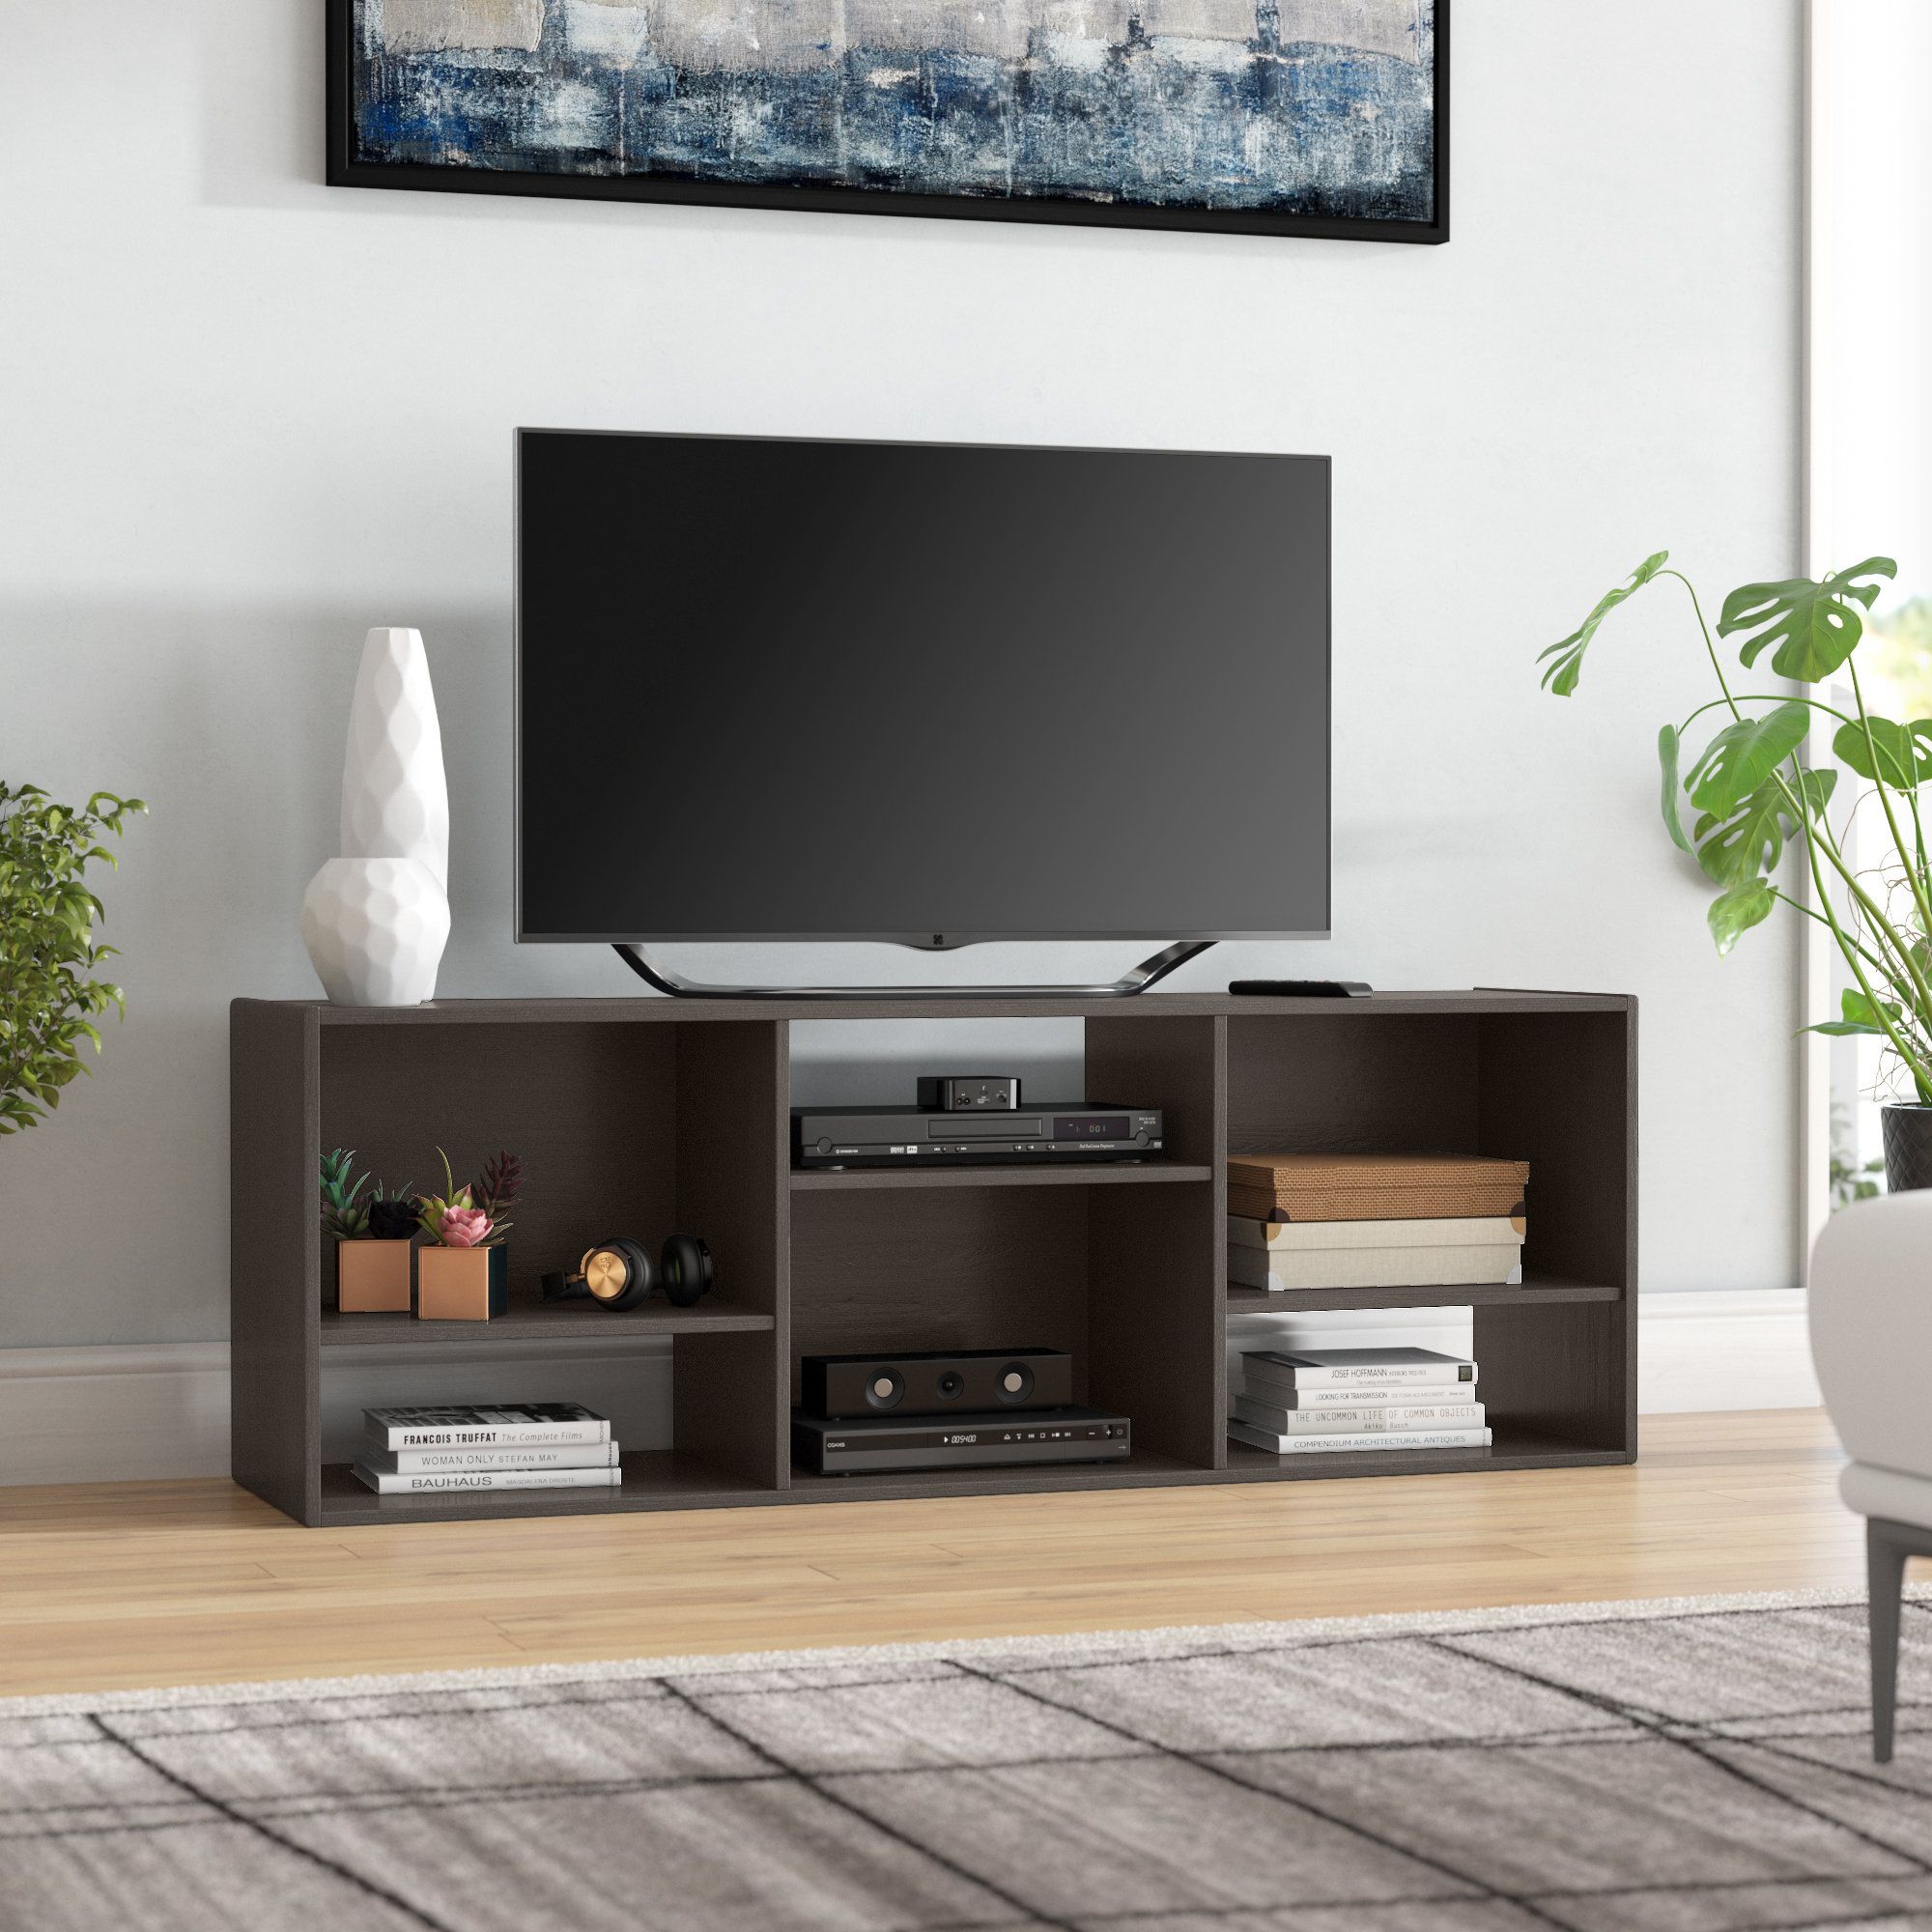 Zipcode Design Gracie Tv Stand For Tvs Up To 60" & Reviews | Wayfair Pertaining To Kenzie 60 Inch Open Display Tv Stands (View 7 of 30)